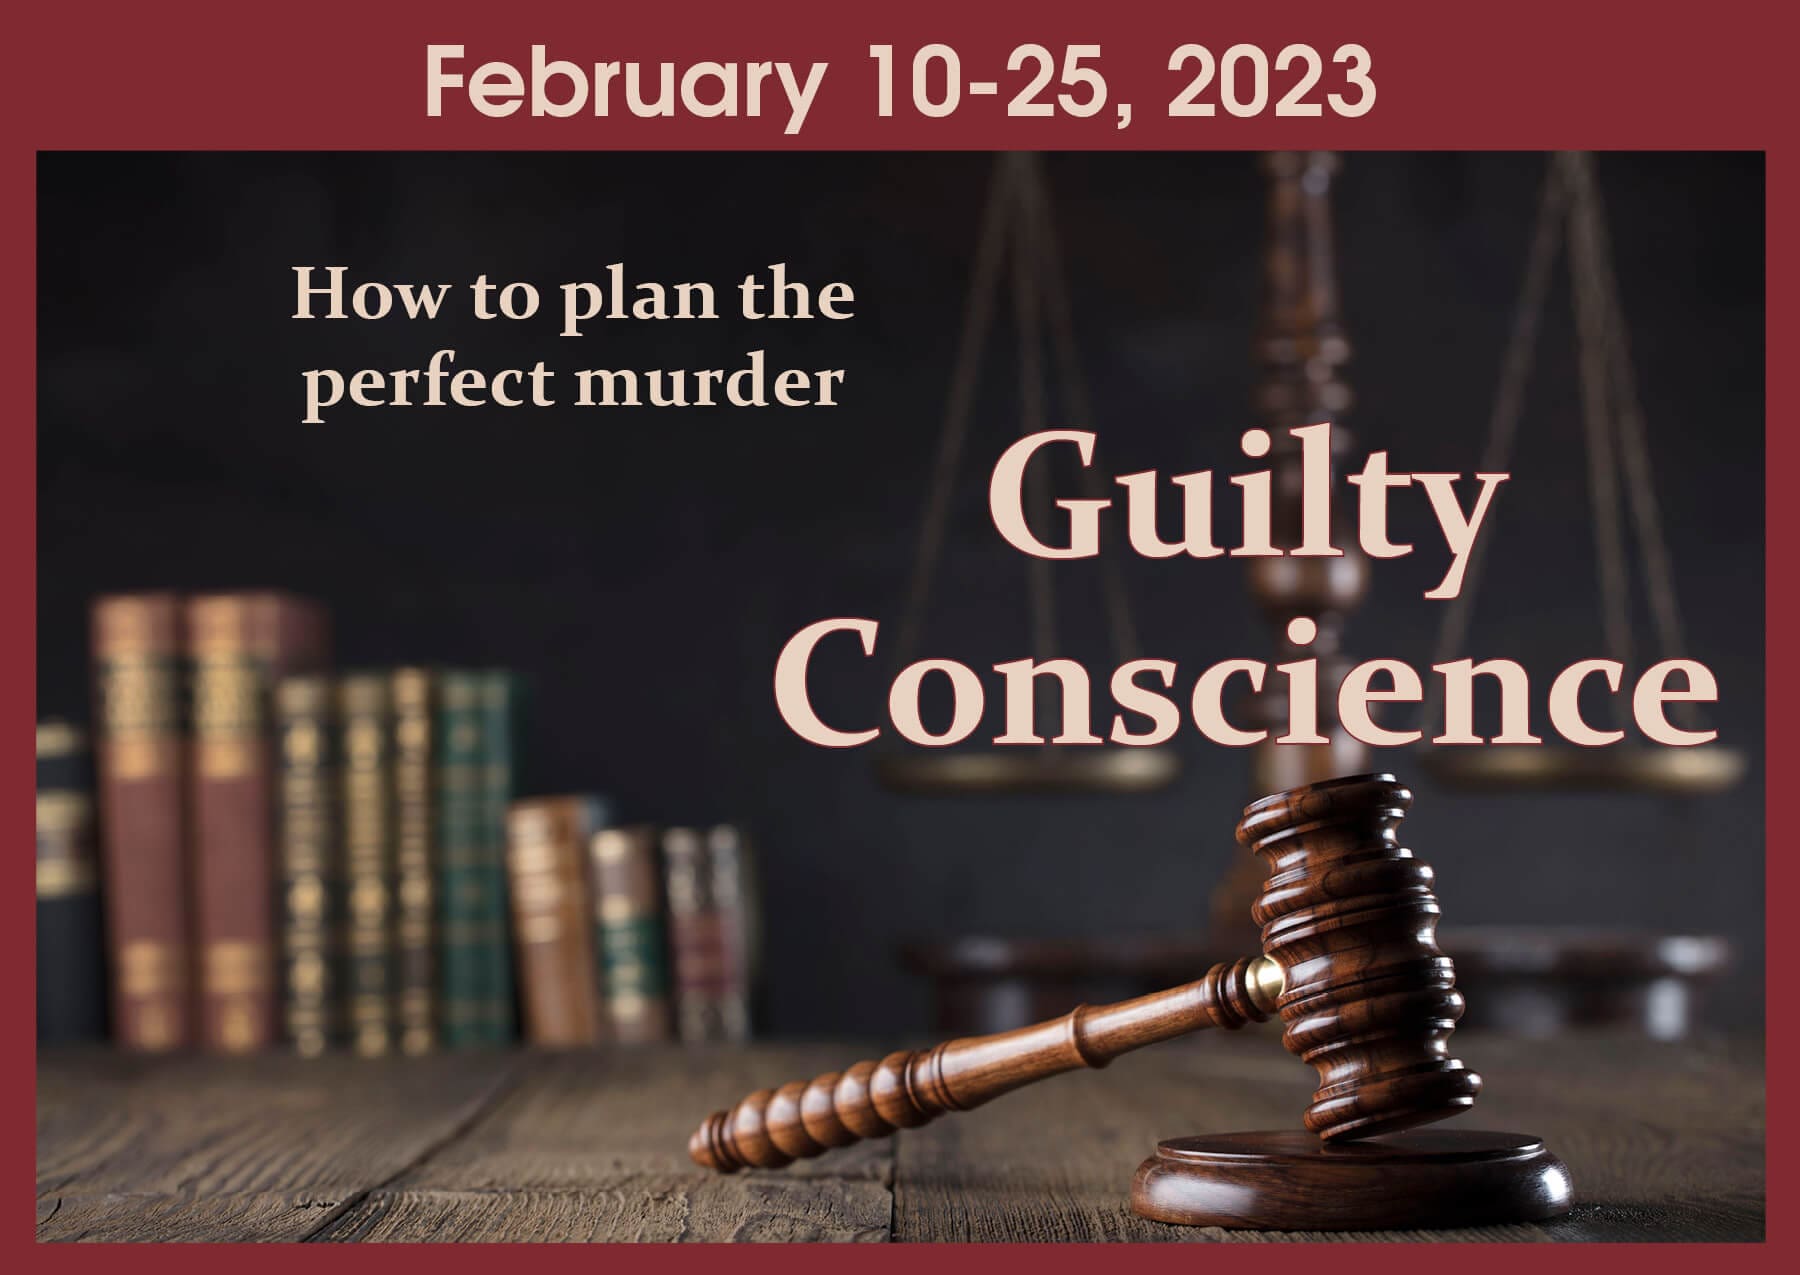 Guilty Conscience Coaster Theatre Playhouse